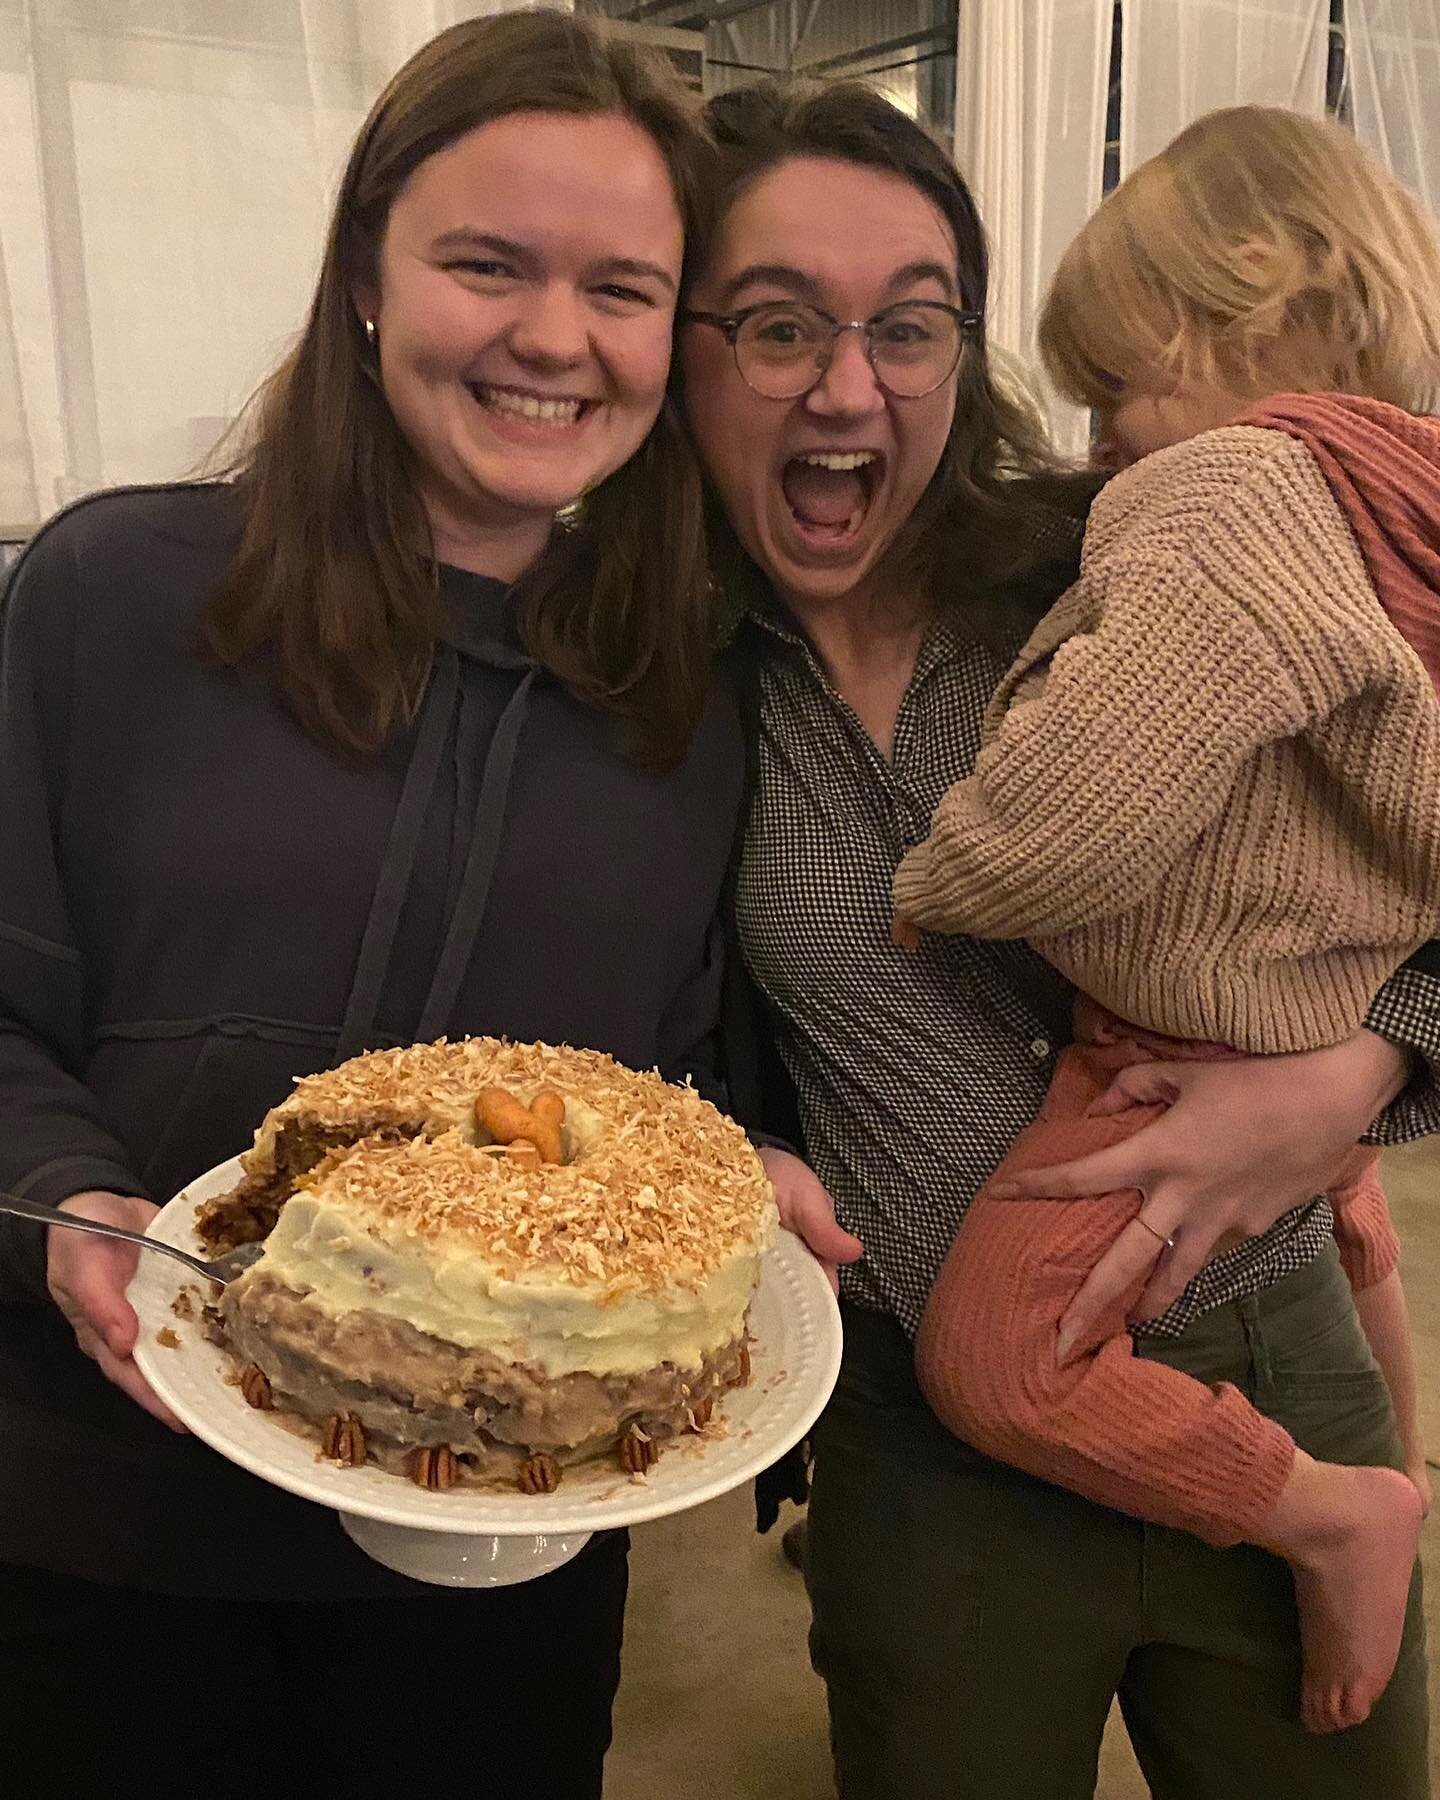 Here are 3 of our winning teams from our annual St Andrew&rsquo;s Carrot Cake Competition this past week! What fun to celebrate together! 😉🥕

&bull;&bull;&bull;

#redeemergso #feastday #carrotcake